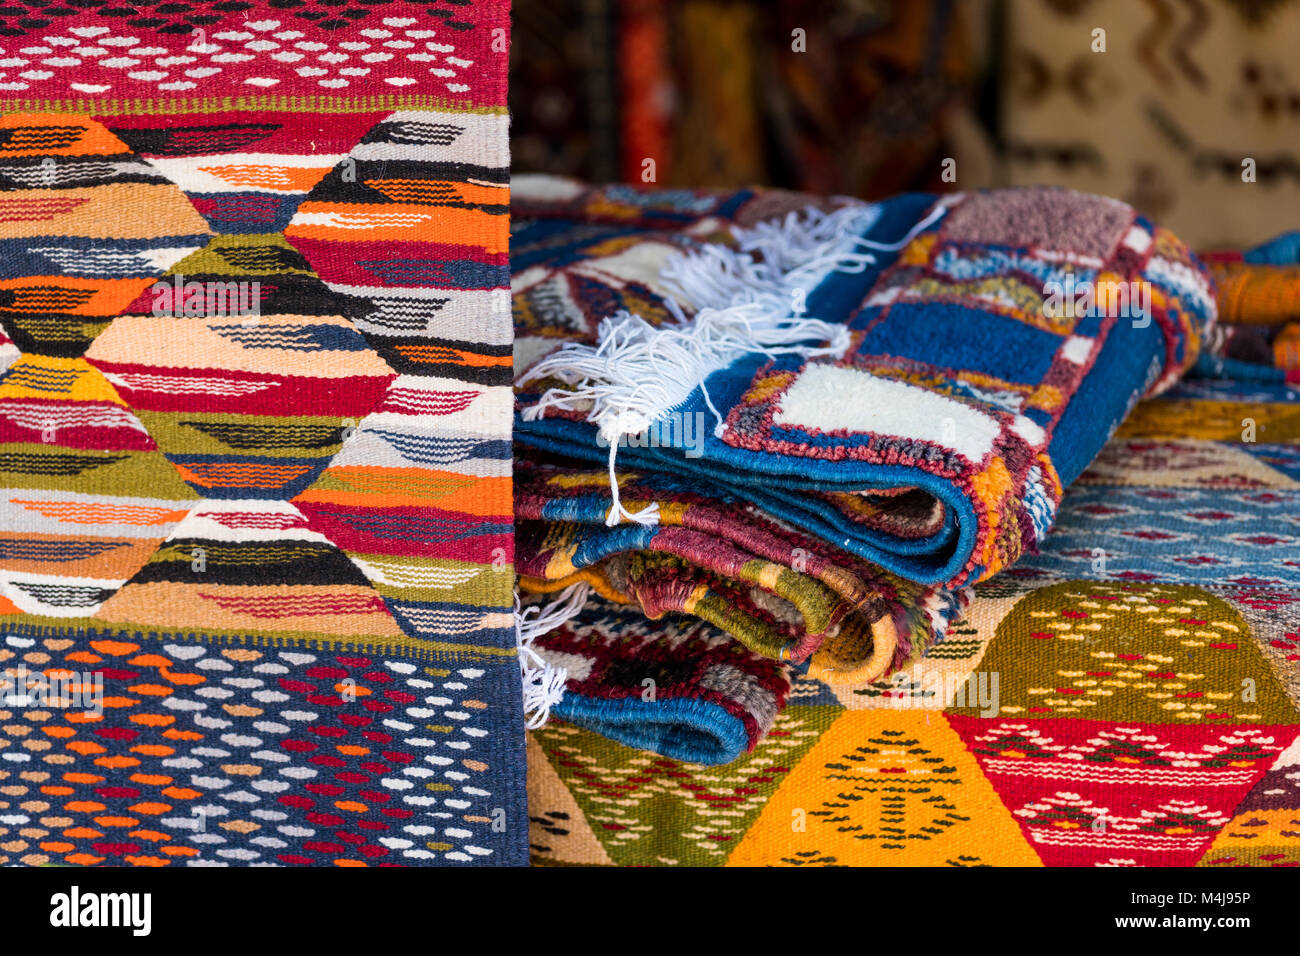 Colorful Moroccan traditional handmade carpets with decorative patterns Stock Photo